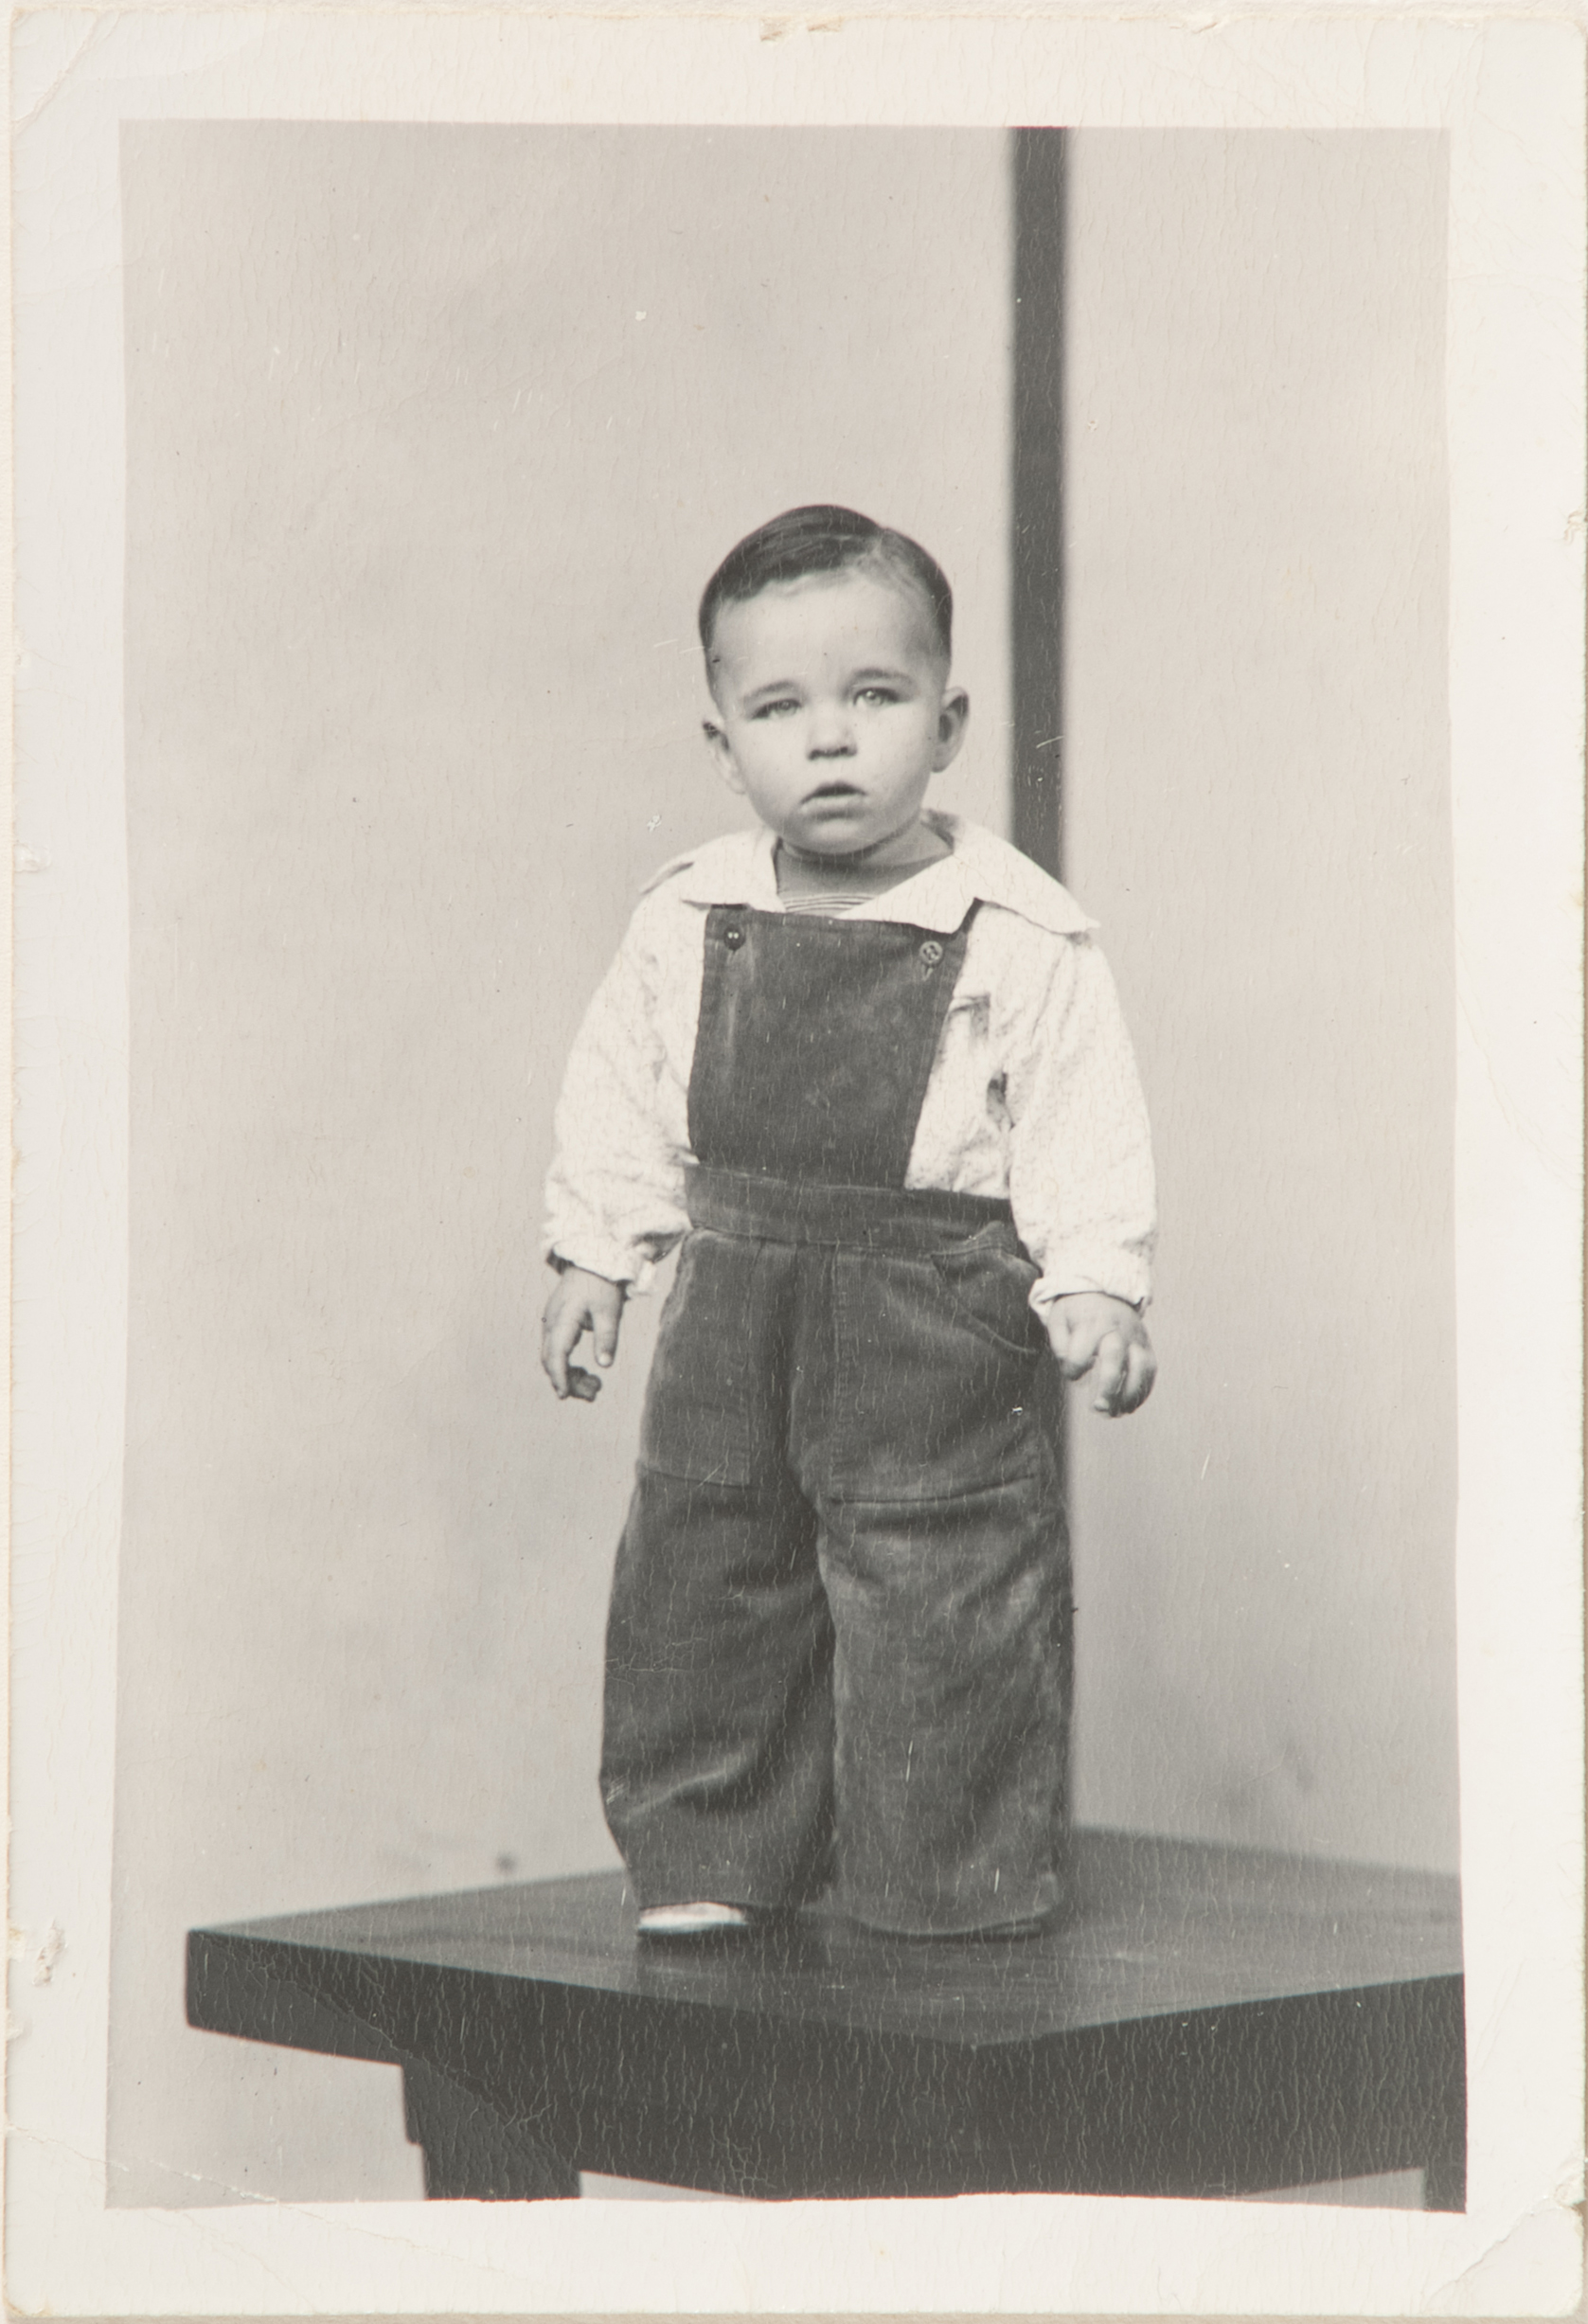 Boy on table in white shirt and rompers, striped background